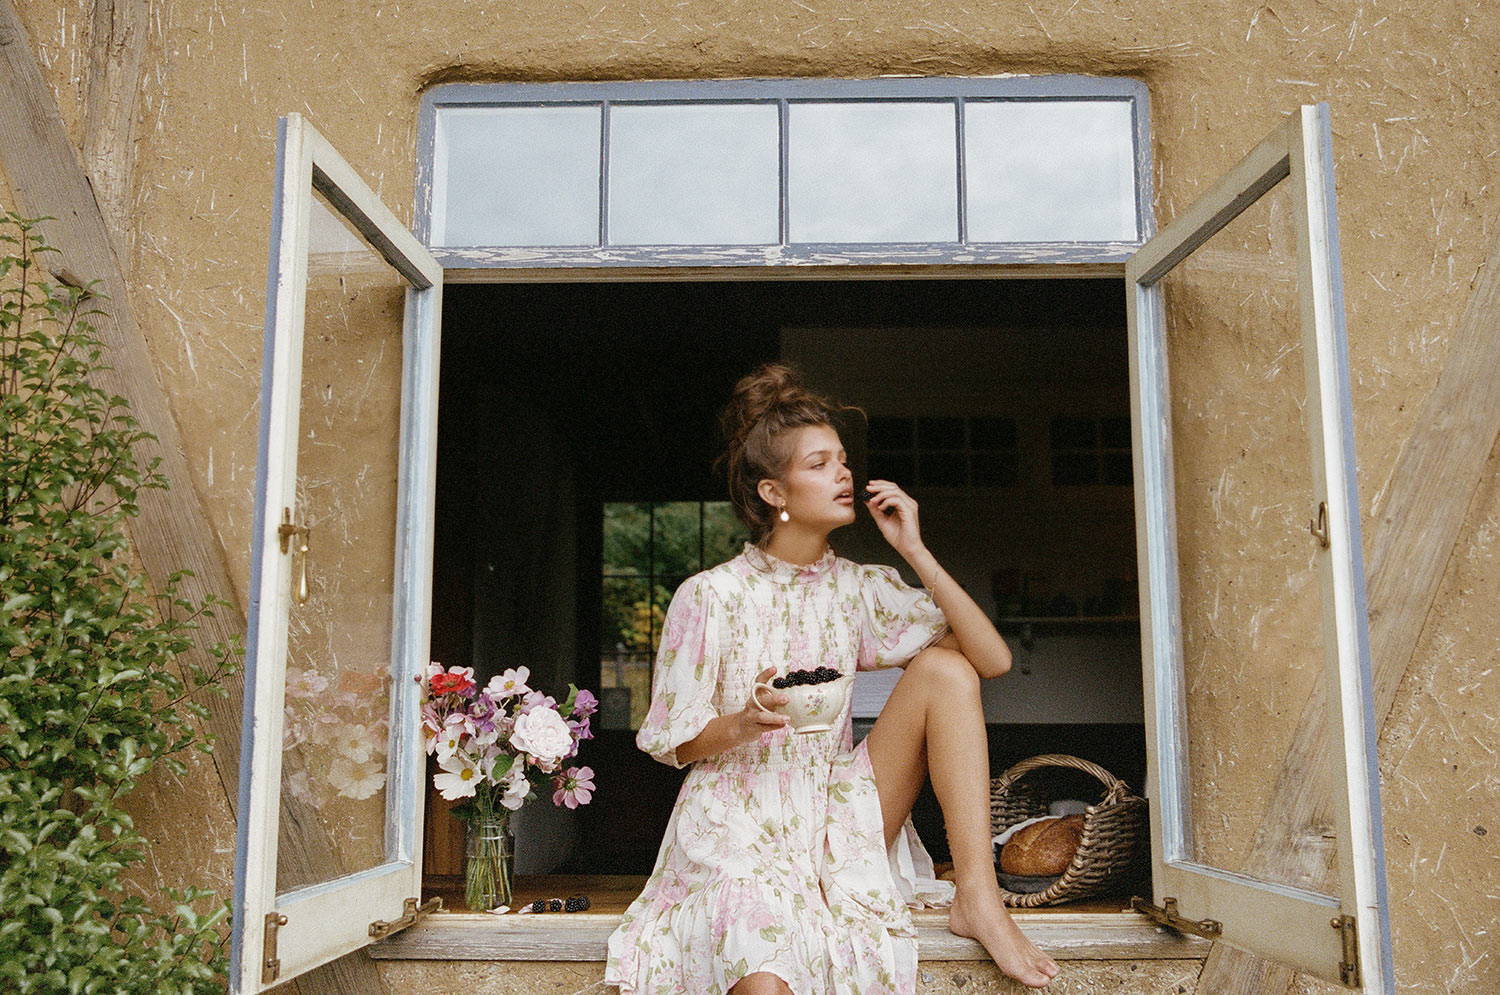 Rose Garden campaign model, Elise Zecevic, sitting on the windowsill of a lake-side cottage while holding a jug filled with mulberries while wearing the rose Rose Garden Mini Dress, featuring high neckline and shirred bodice. 